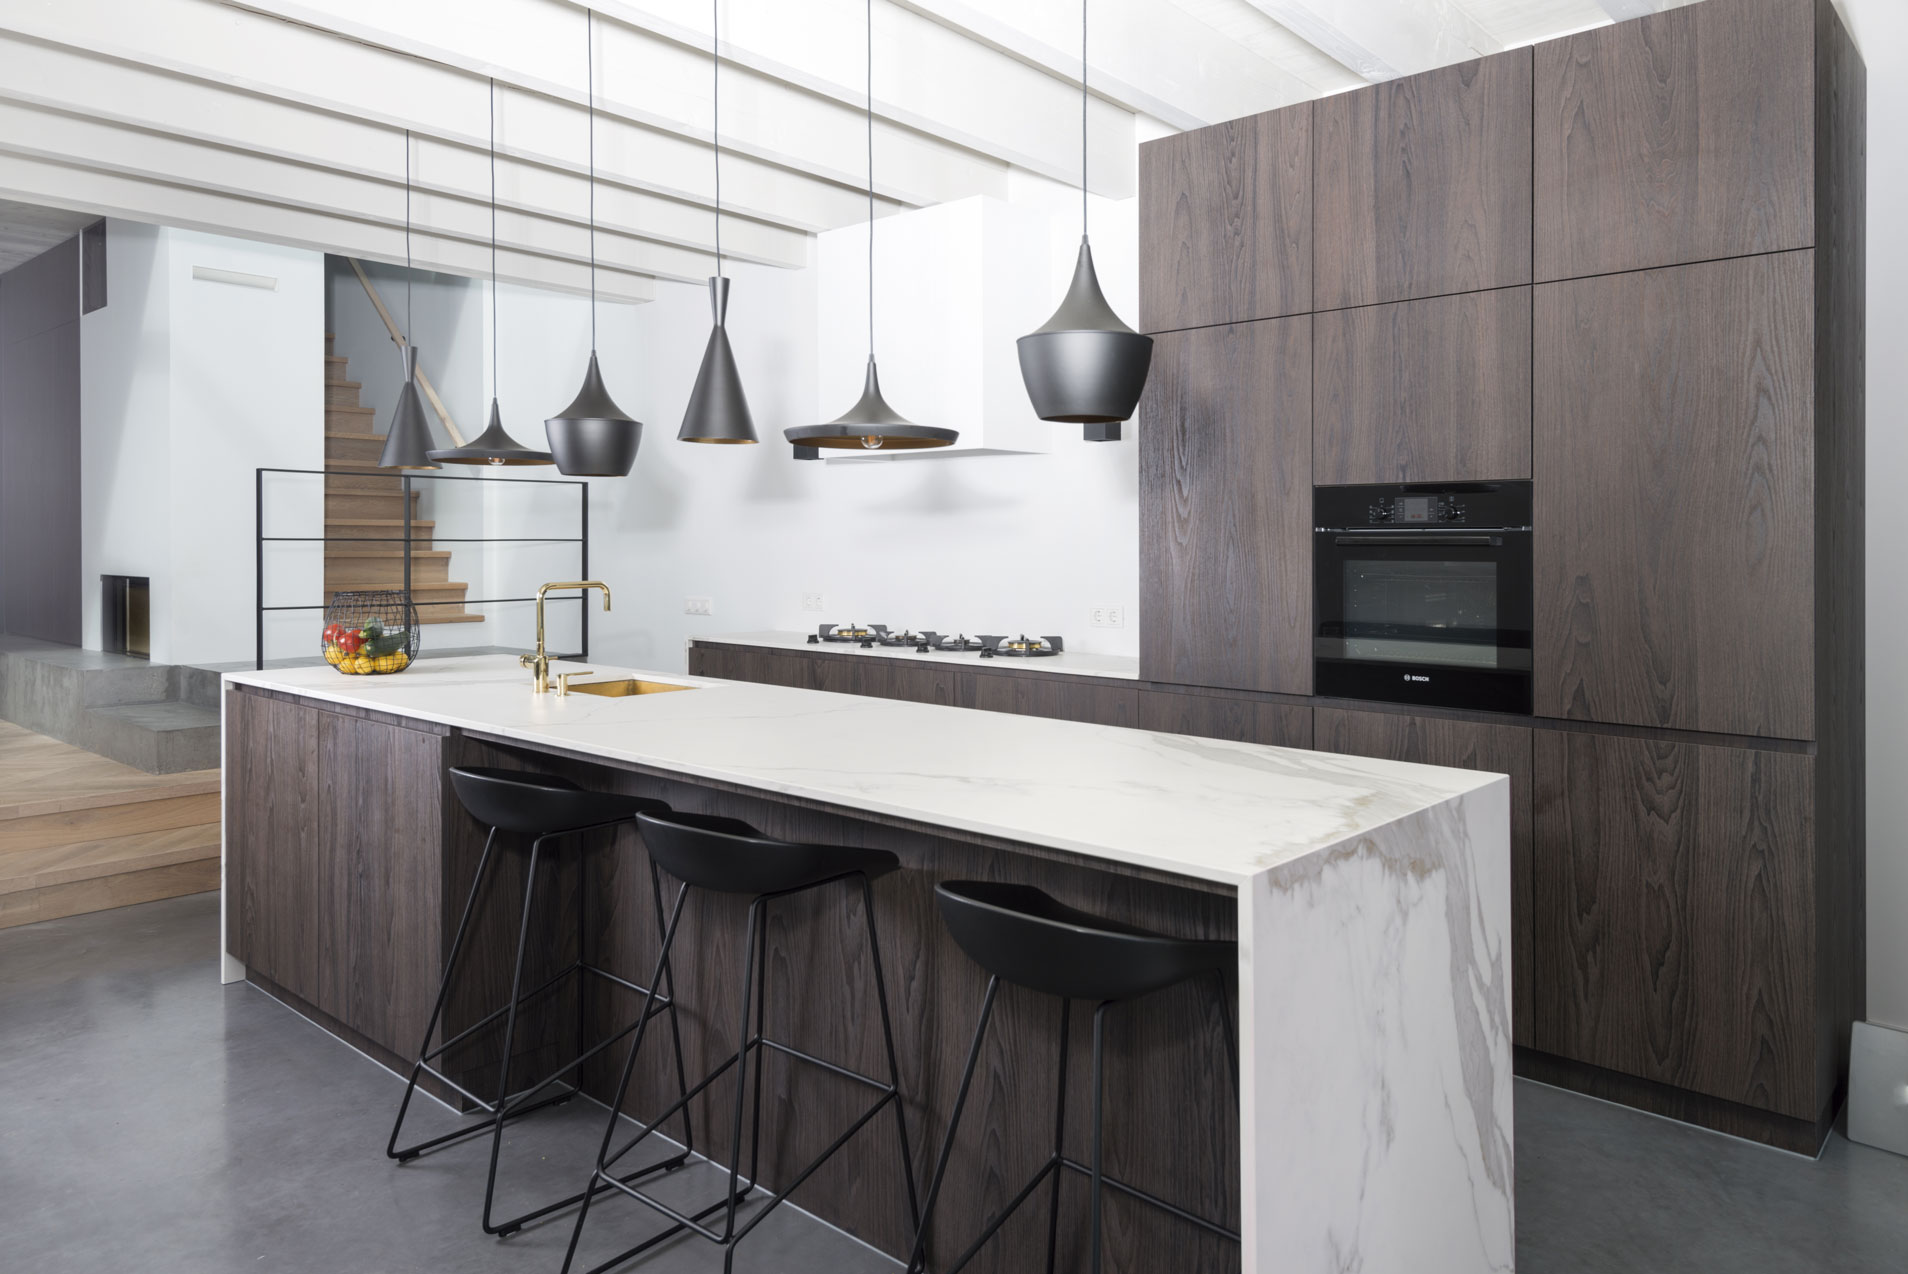 Top Reasons To Use Neolith In Your Next Kitchen Remodel